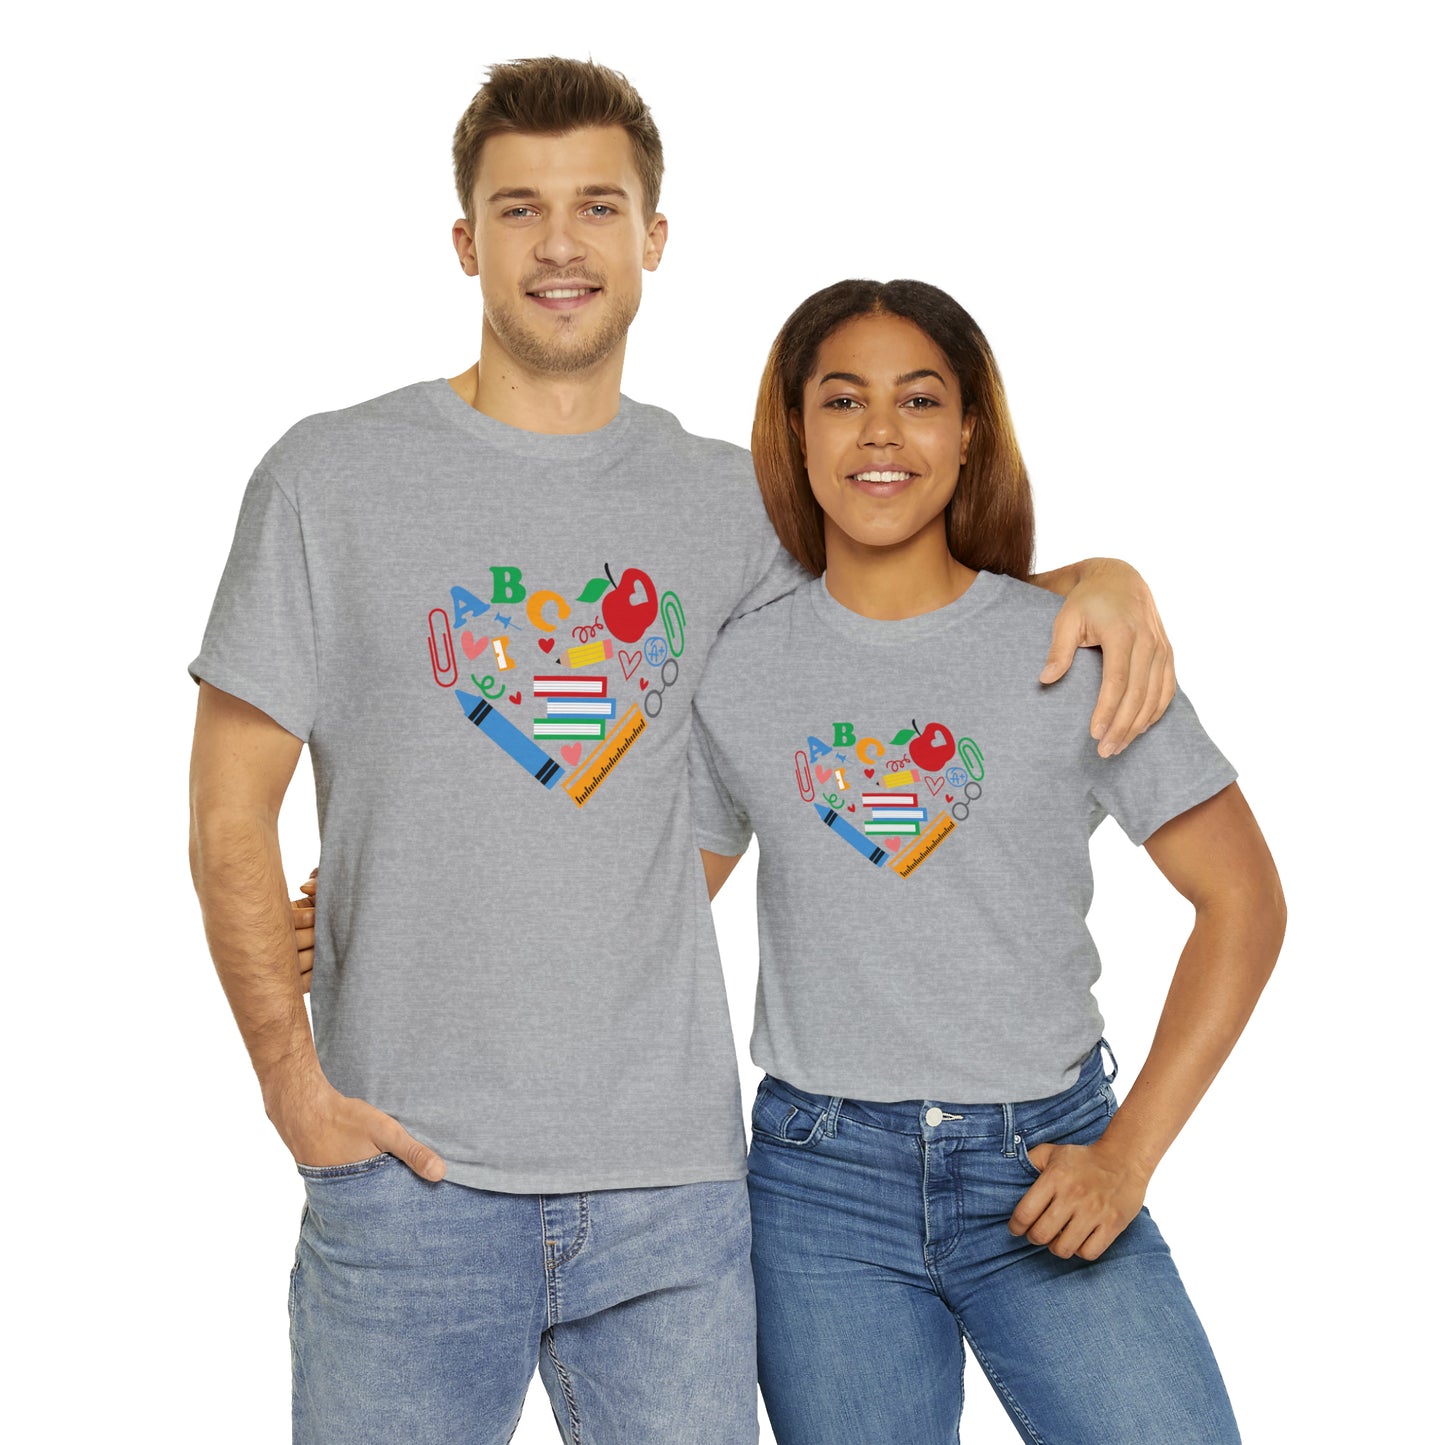 Mock up of a man and a woman wearing the Sport Greyshirt